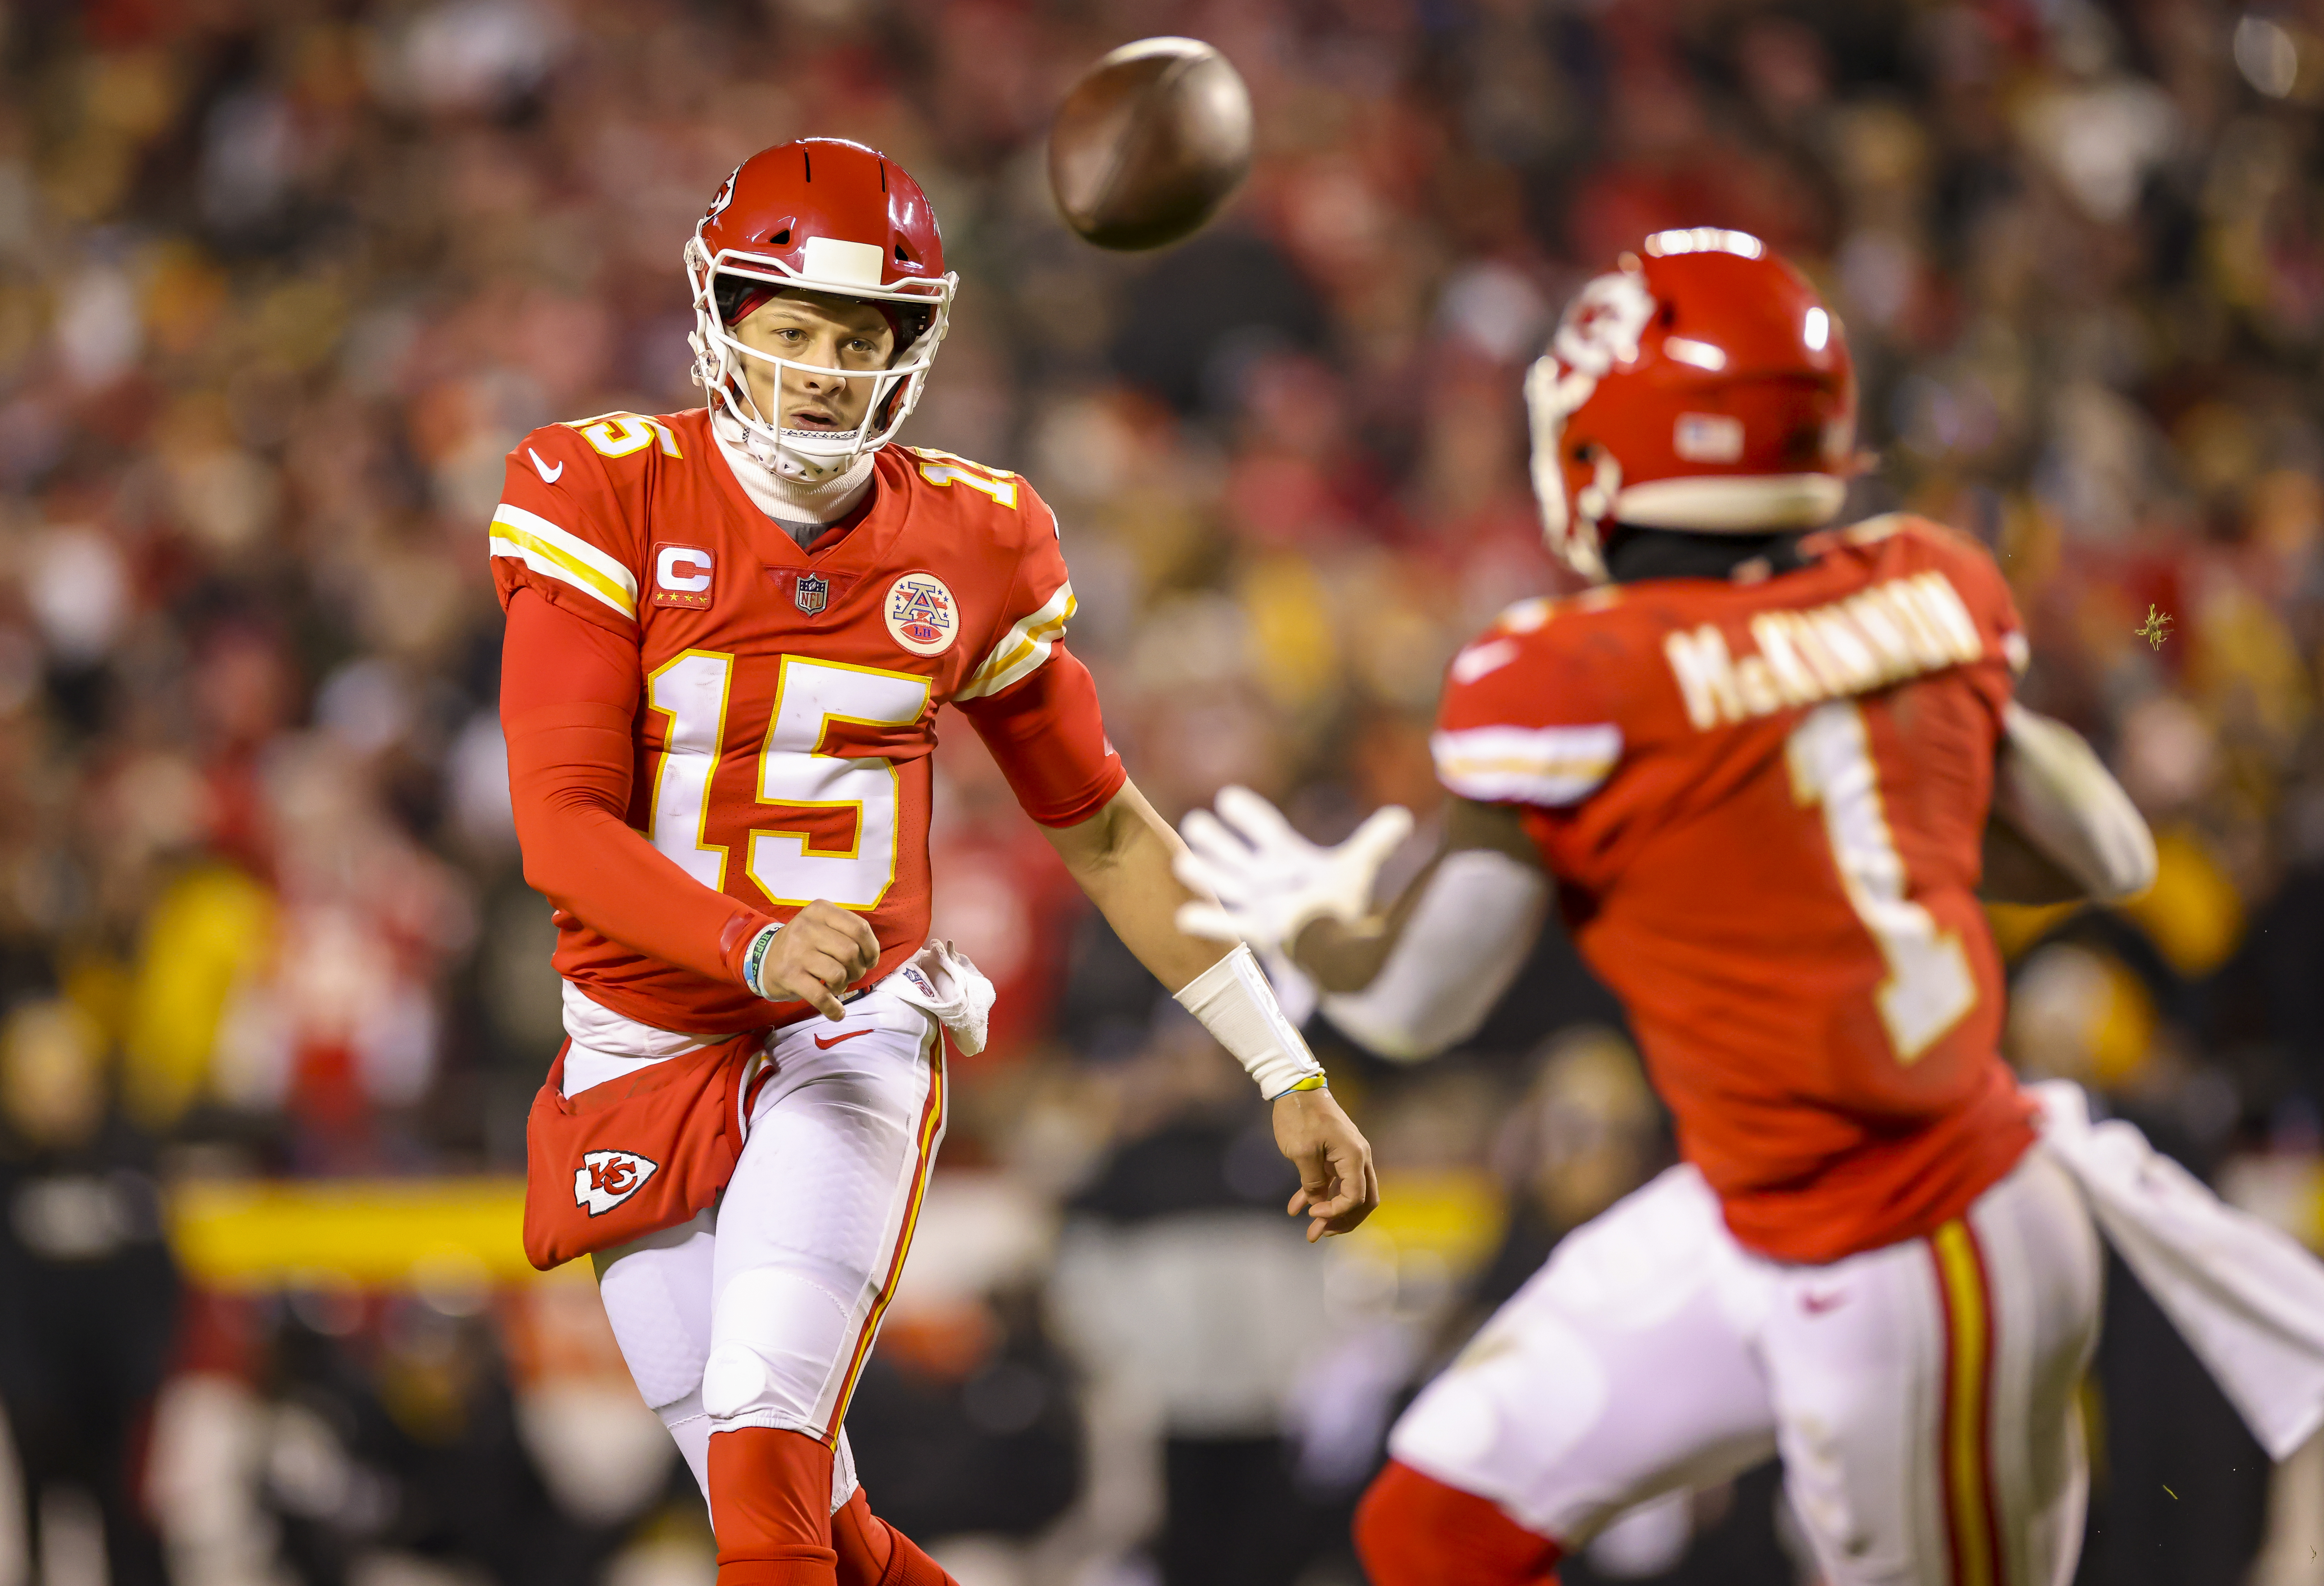 Patrick Mahomes #15 of the Kansas City Chiefs throws a completed pass to Jerick McKinnon #1 of the Kansas City Chiefs in the first quarter against the Pittsburgh Steelers during the AFC Wild Card Playoff game at Arrowhead Stadium on January 16, 2022 in Kansas City, Missouri.